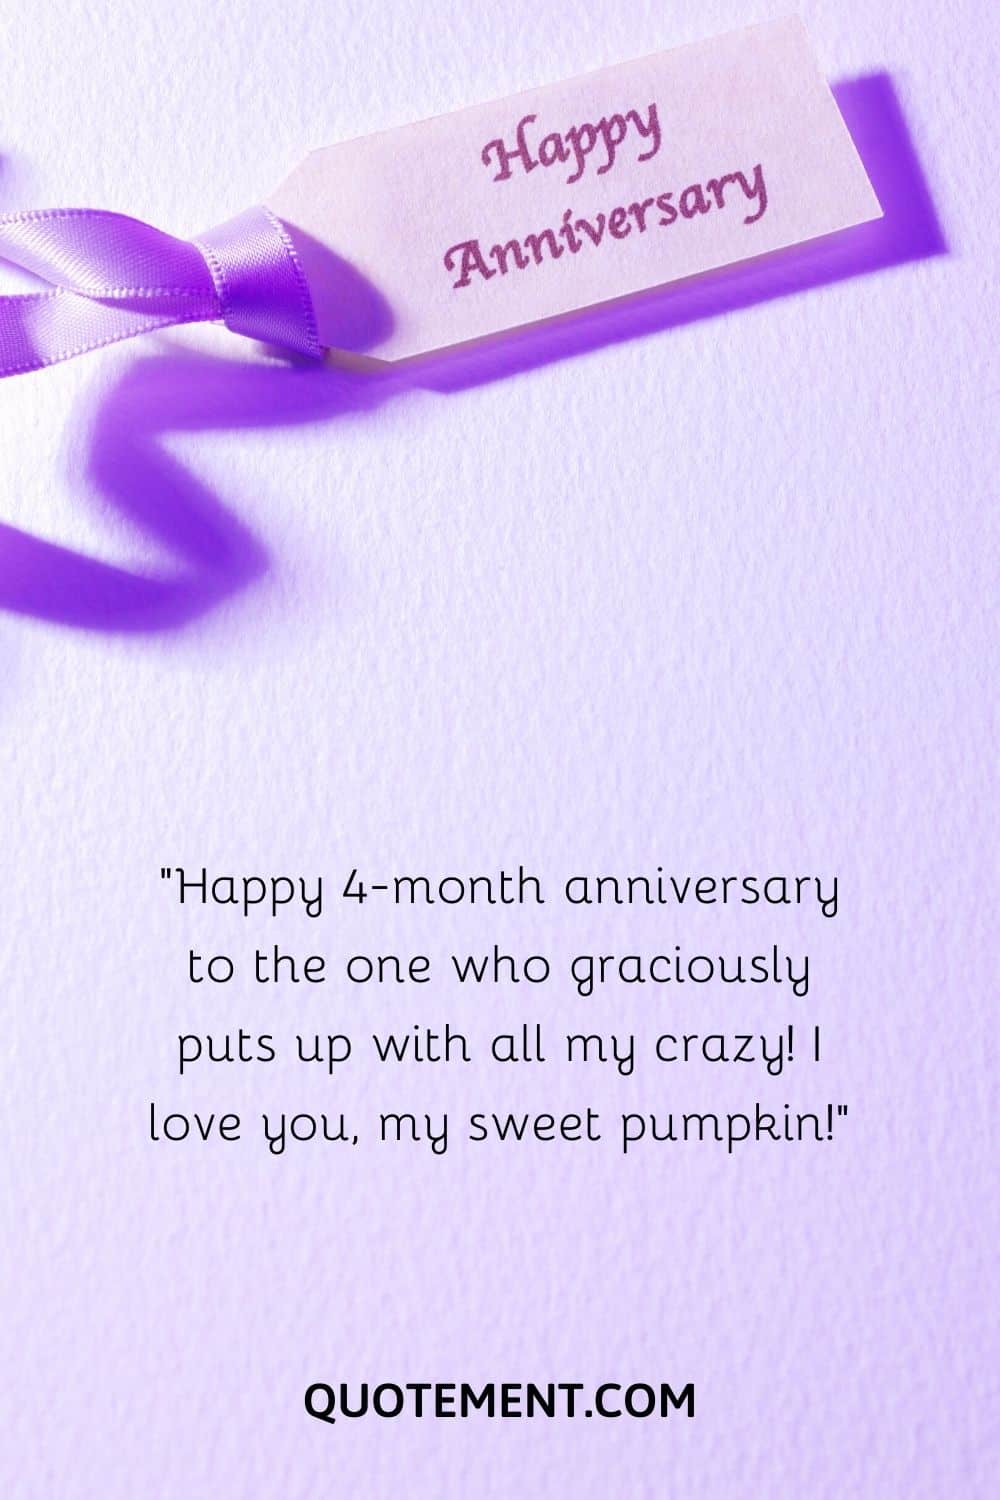 “Happy 4-month anniversary to the one who graciously puts up with all my crazy! I love you, my sweet pumpkin!”